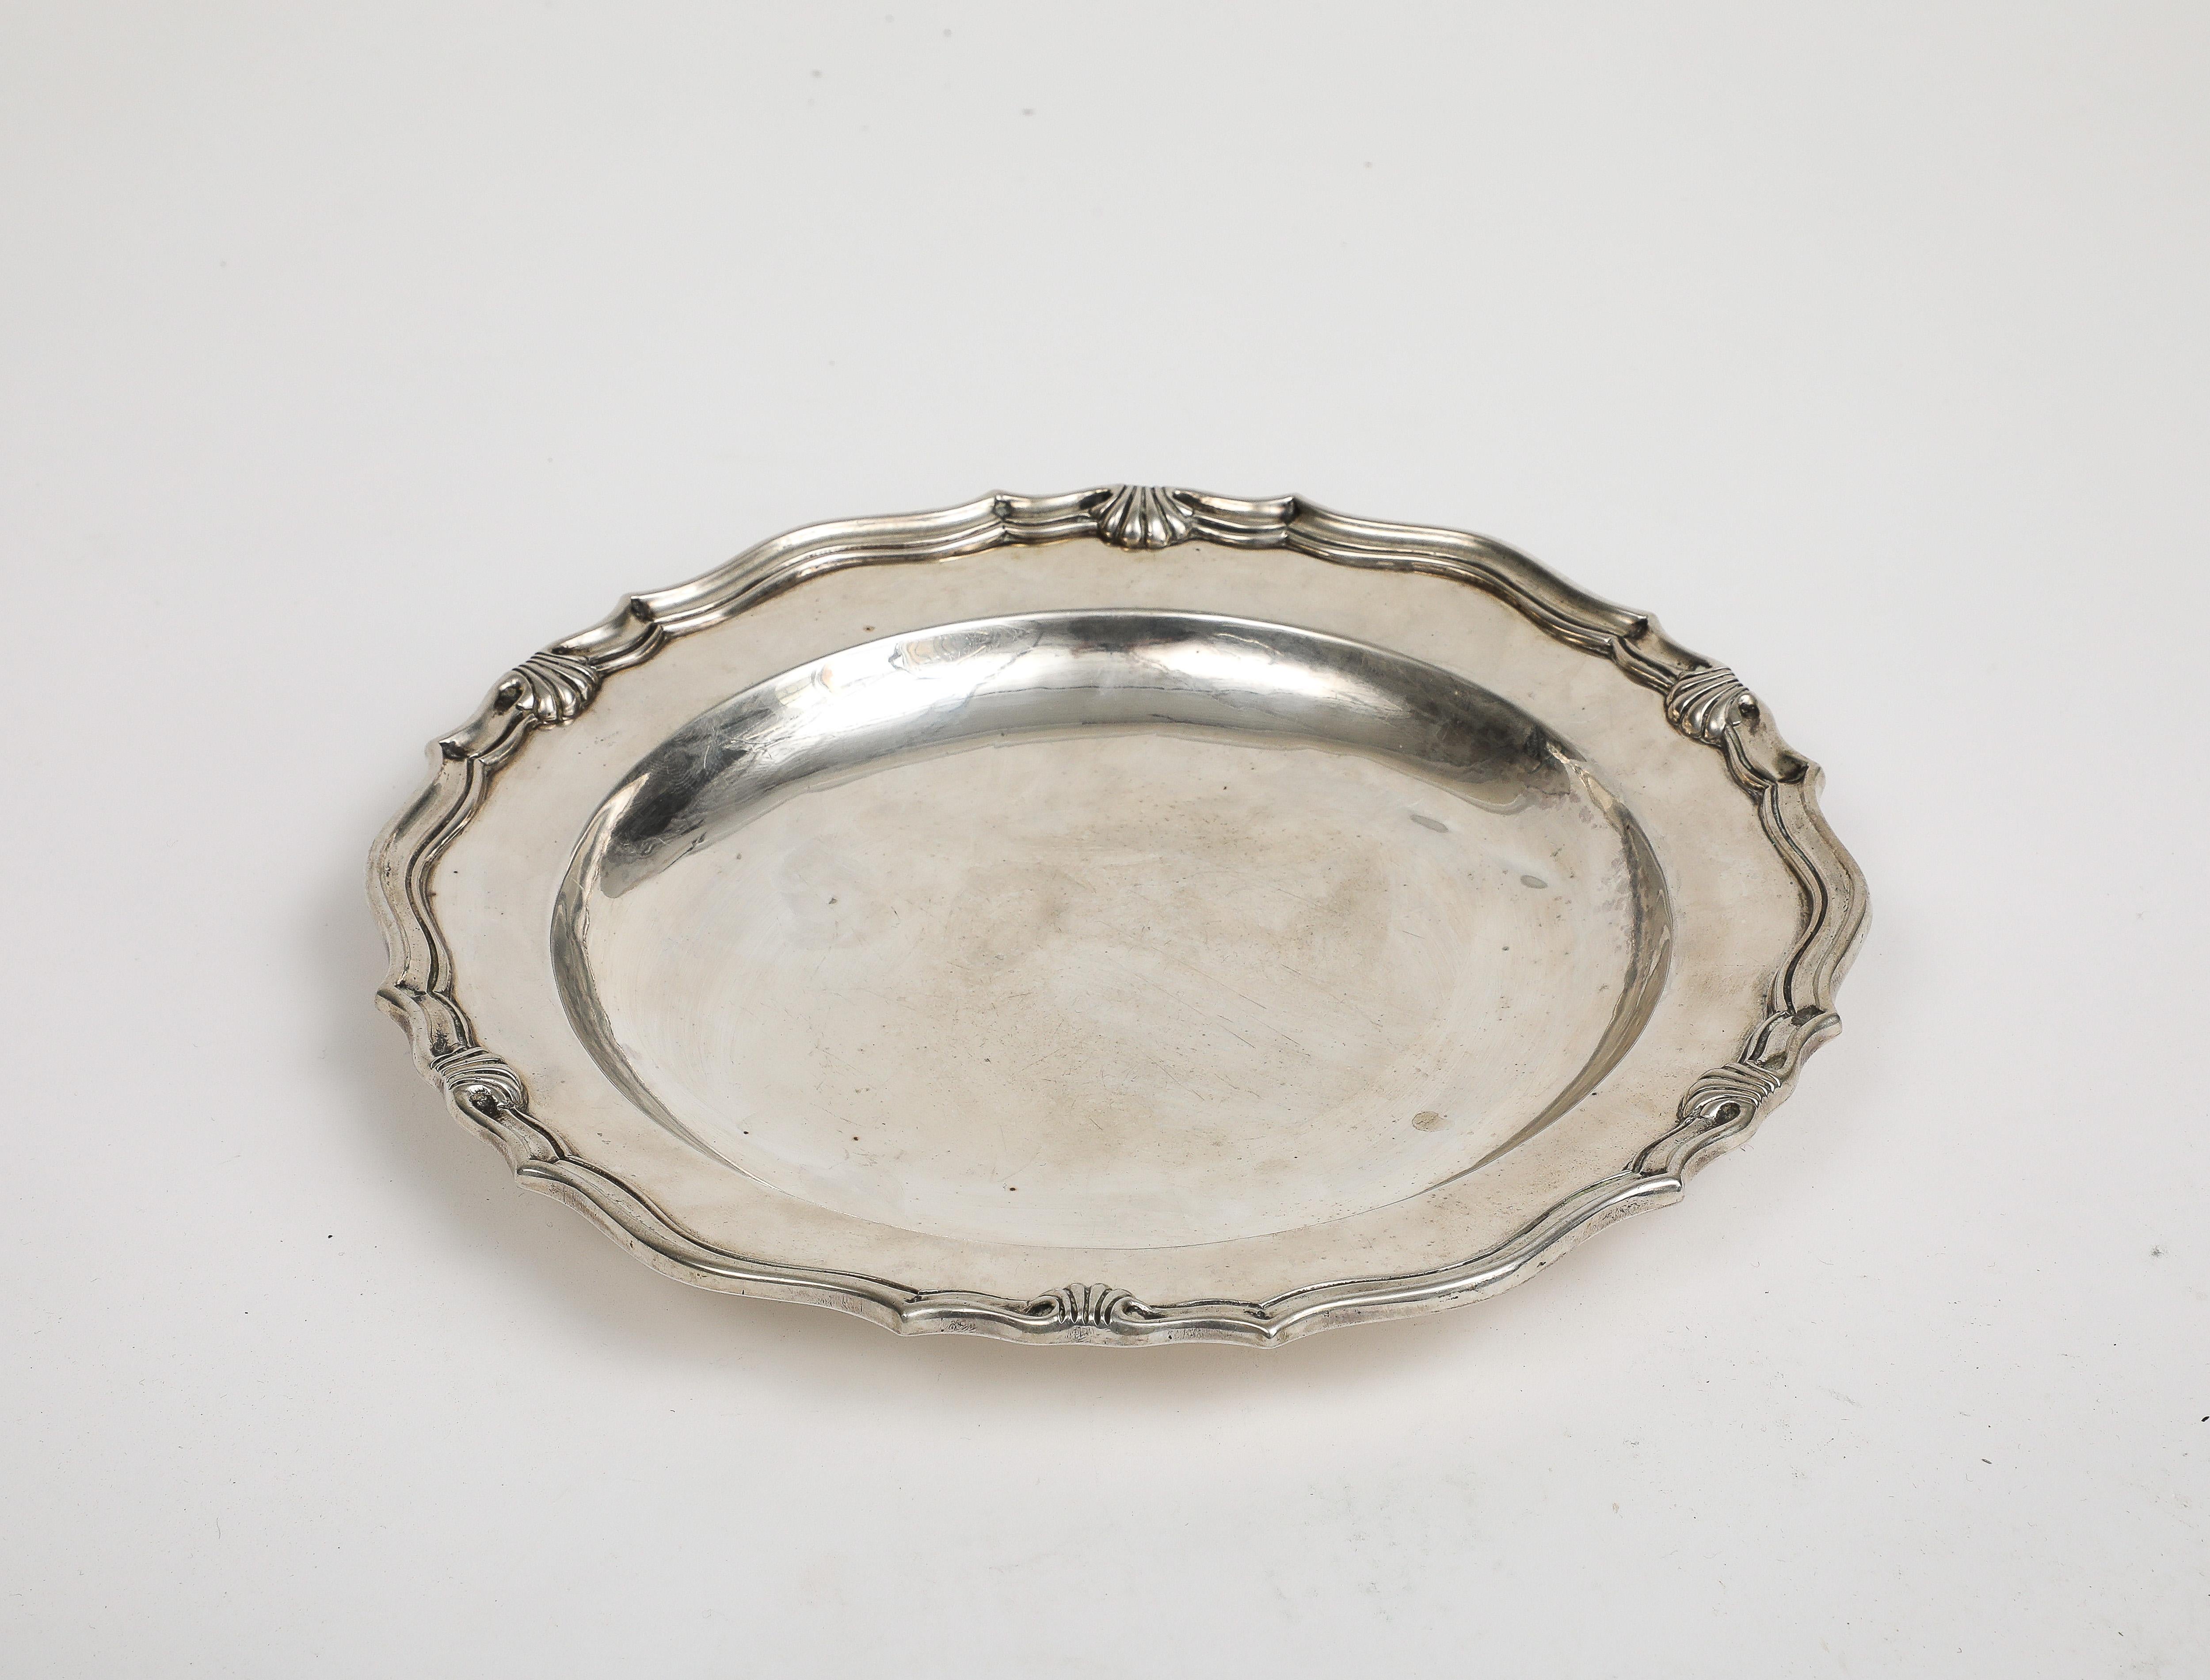 19th century Baroque style Italian silver plate from Turin. Scallop/shell detailed border, stamped on back. 